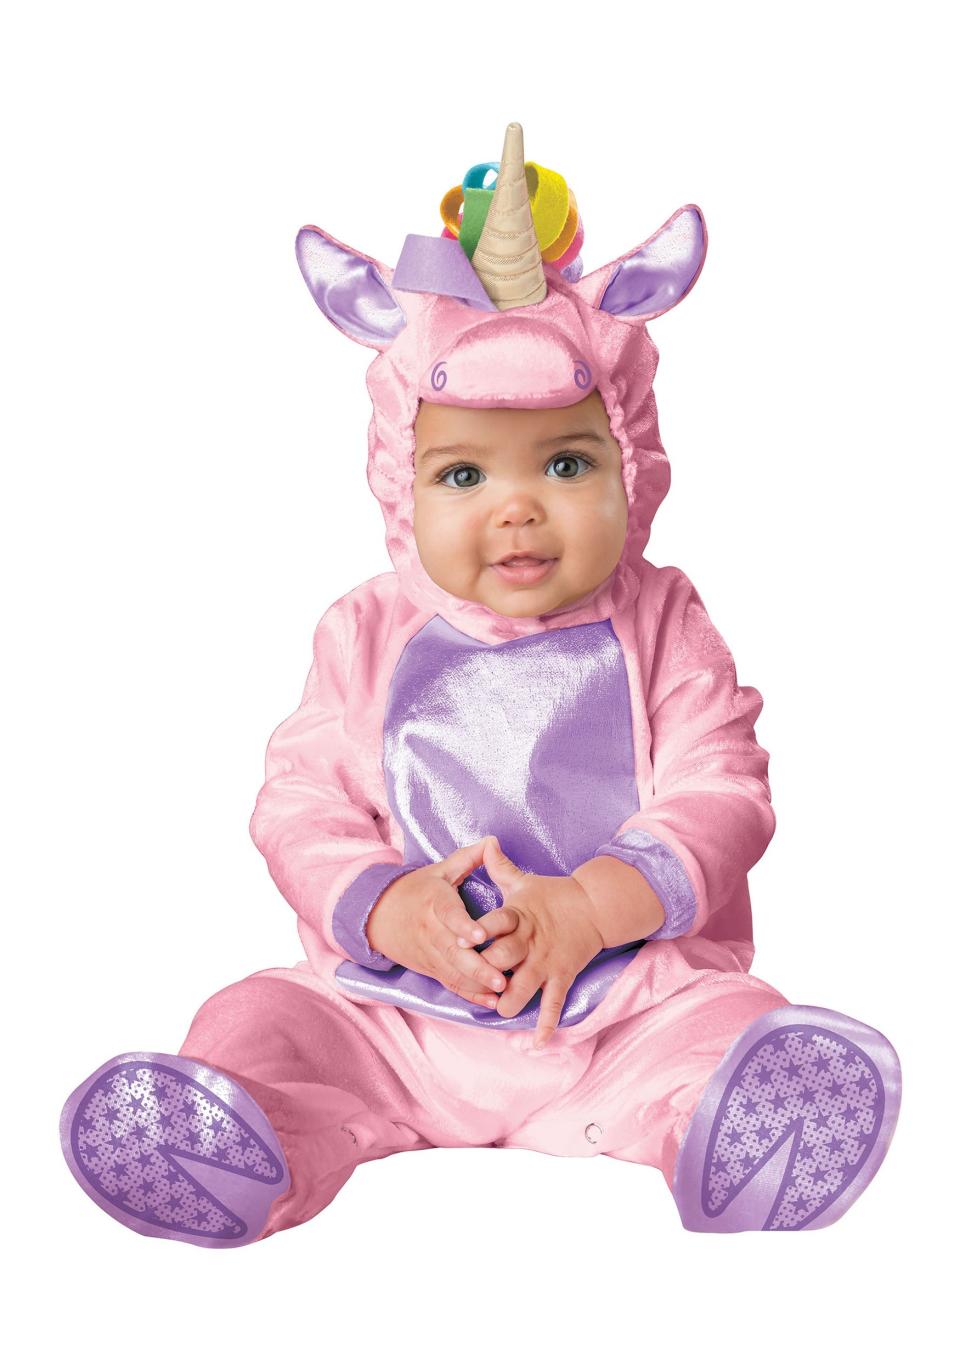 This baby unicorn Halloween costume is the cutest thing who've ever seen. Fact.